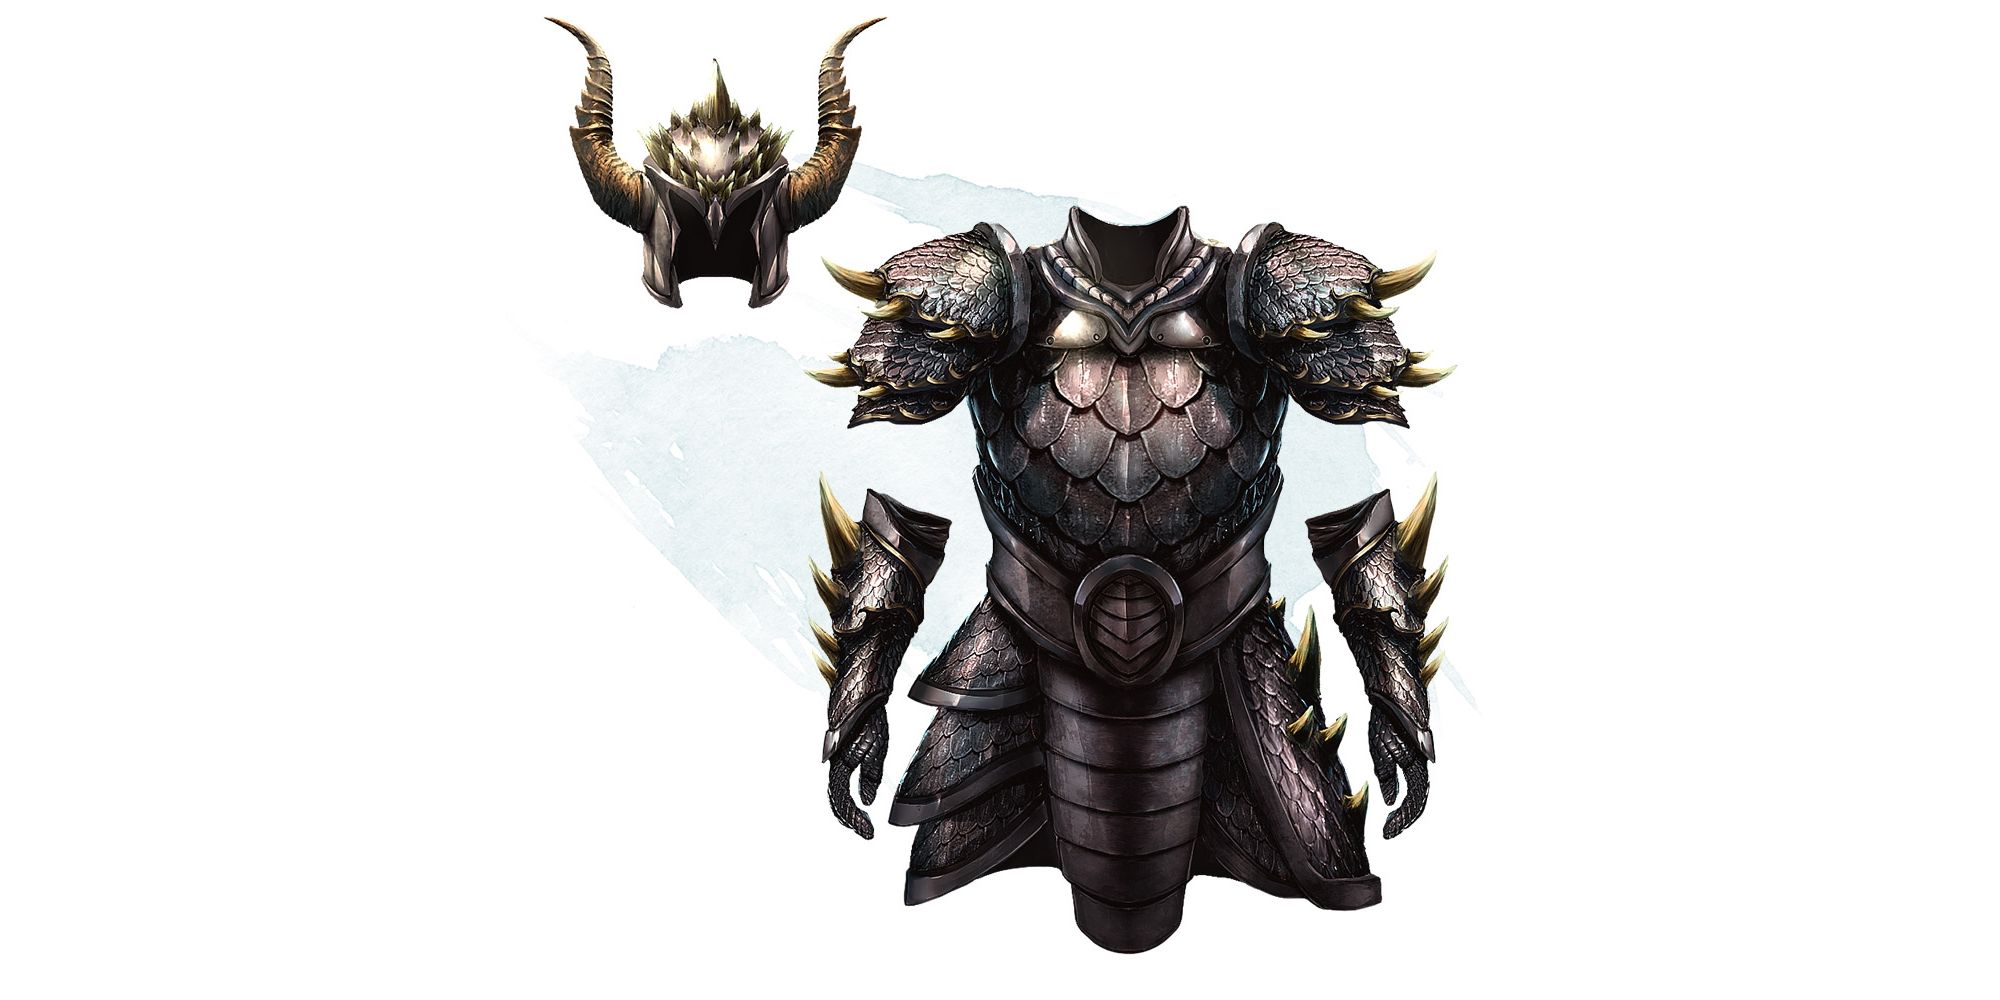 Artwork for DnD's dragon scale mail, dark silver armor adorned with horns.